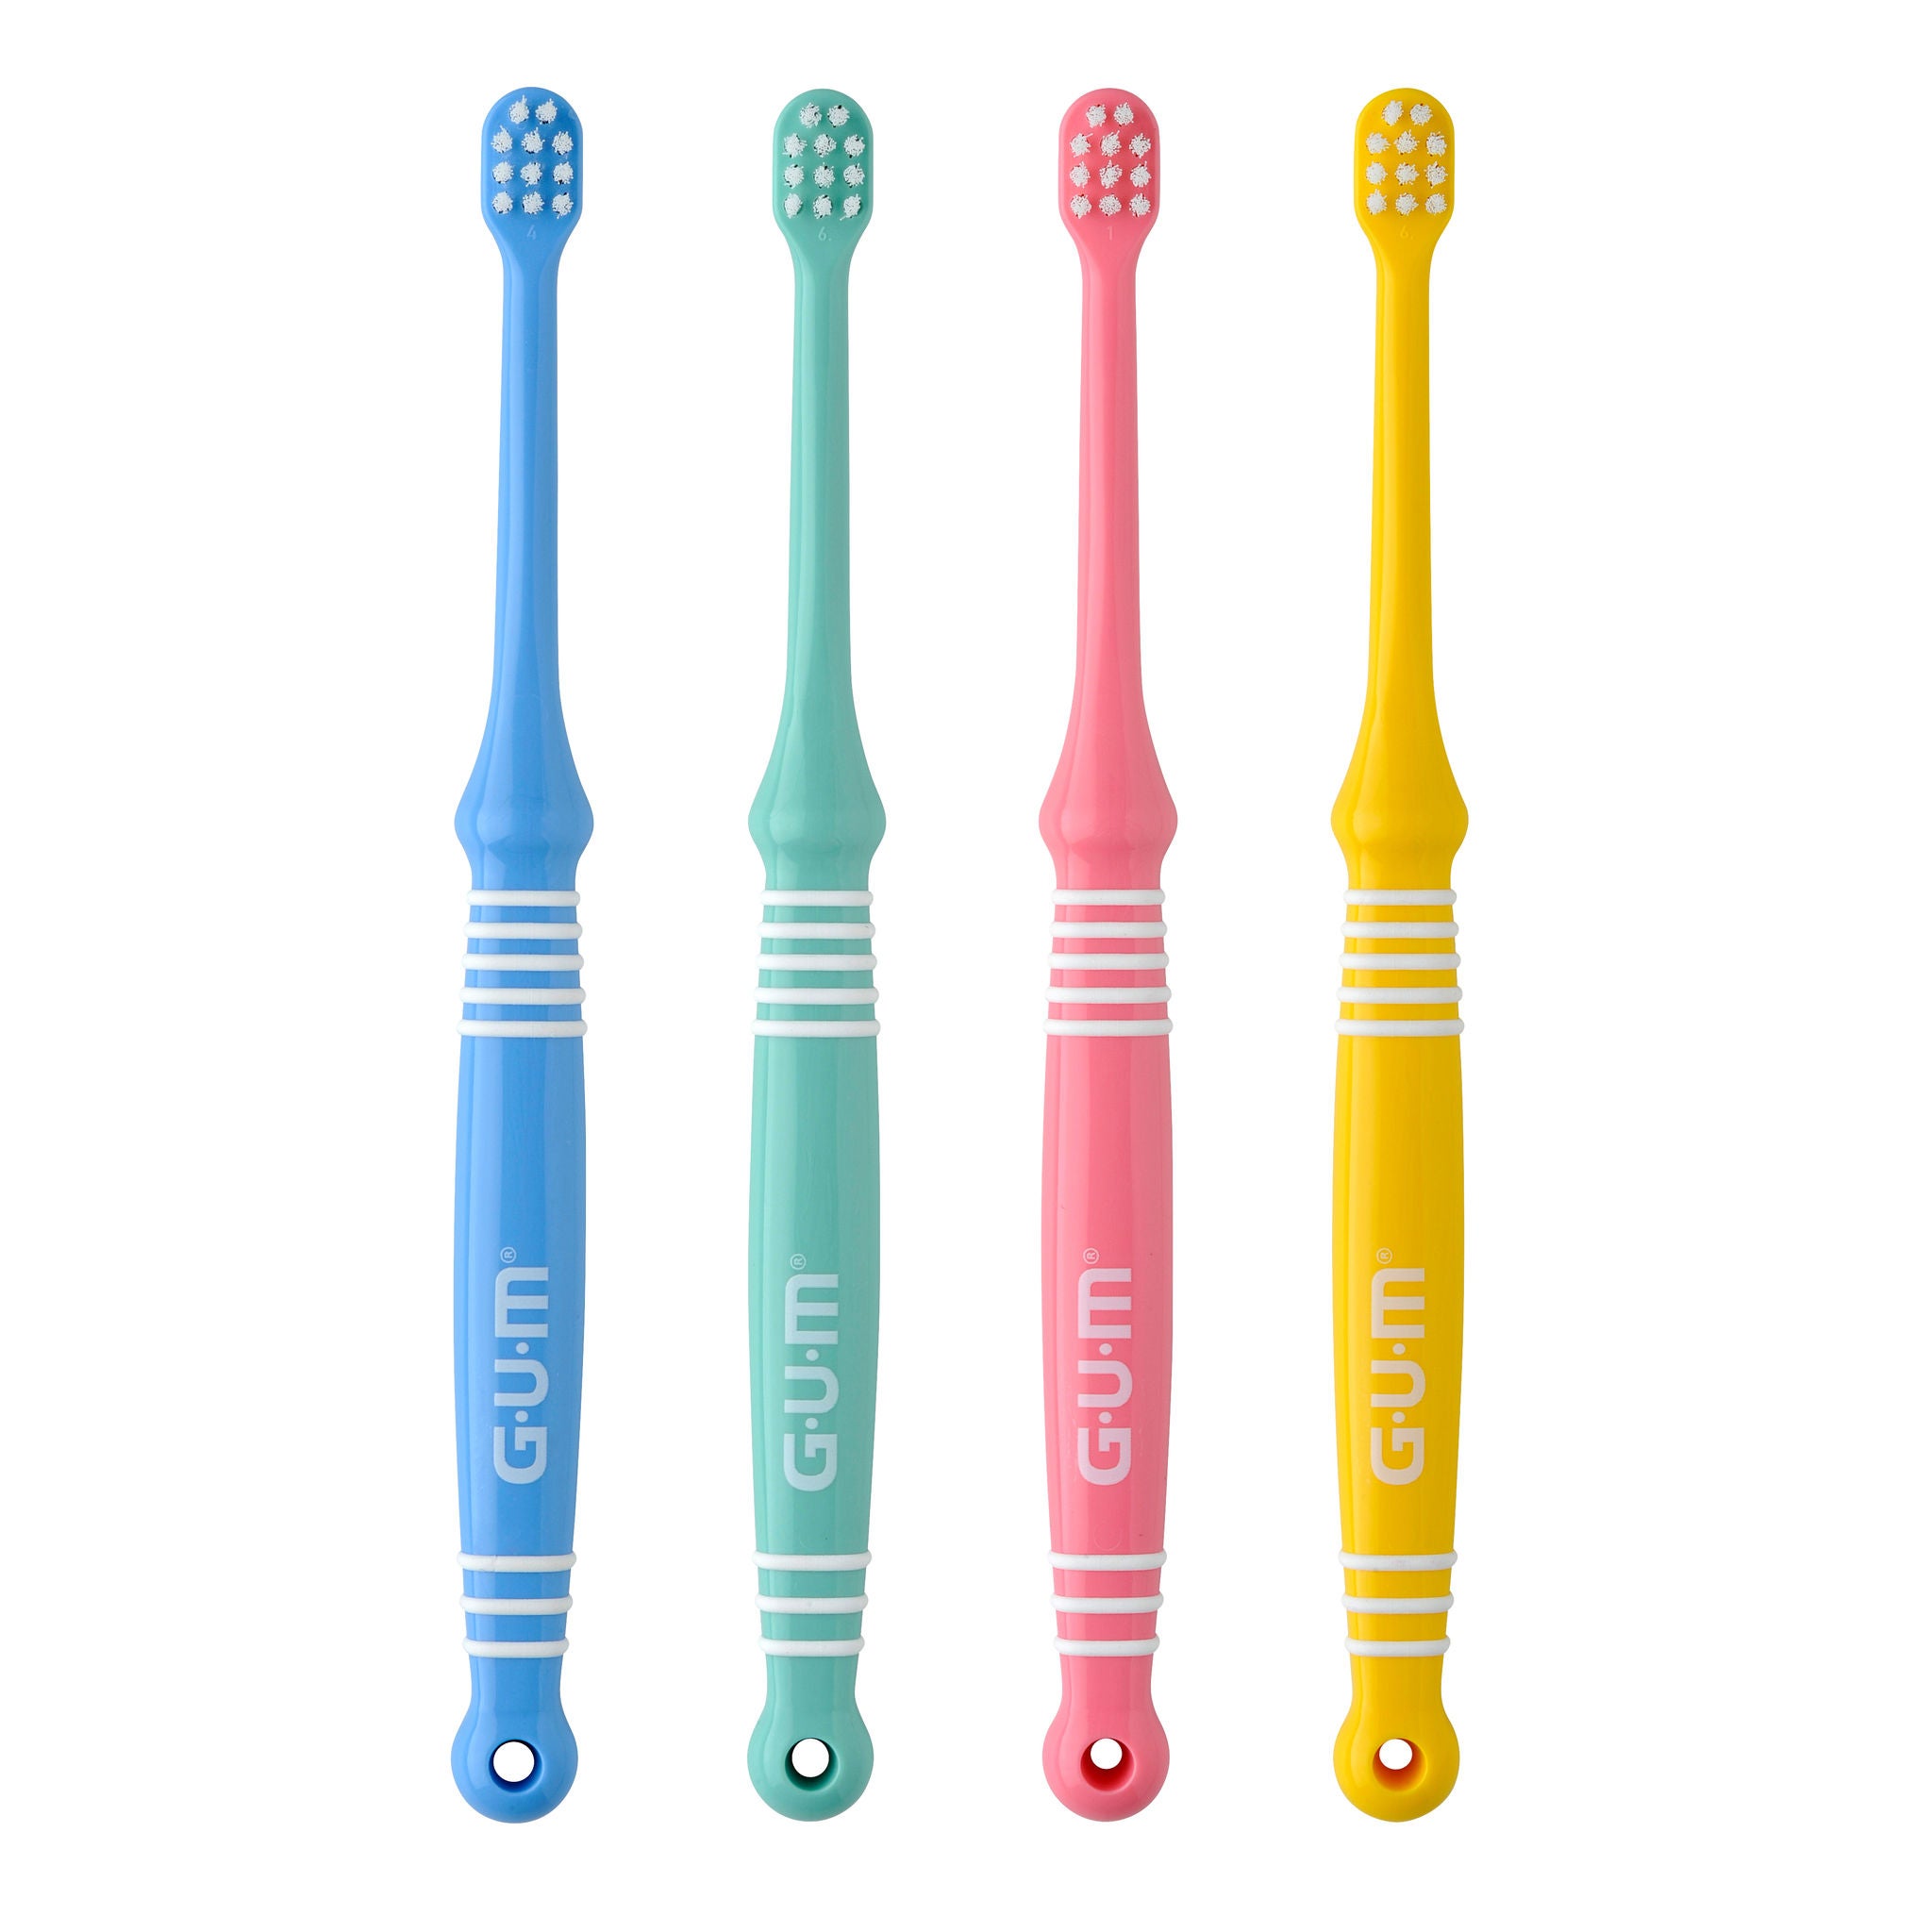 213-Product-Toothbrush-Monsterz-Baby-naked.jpg